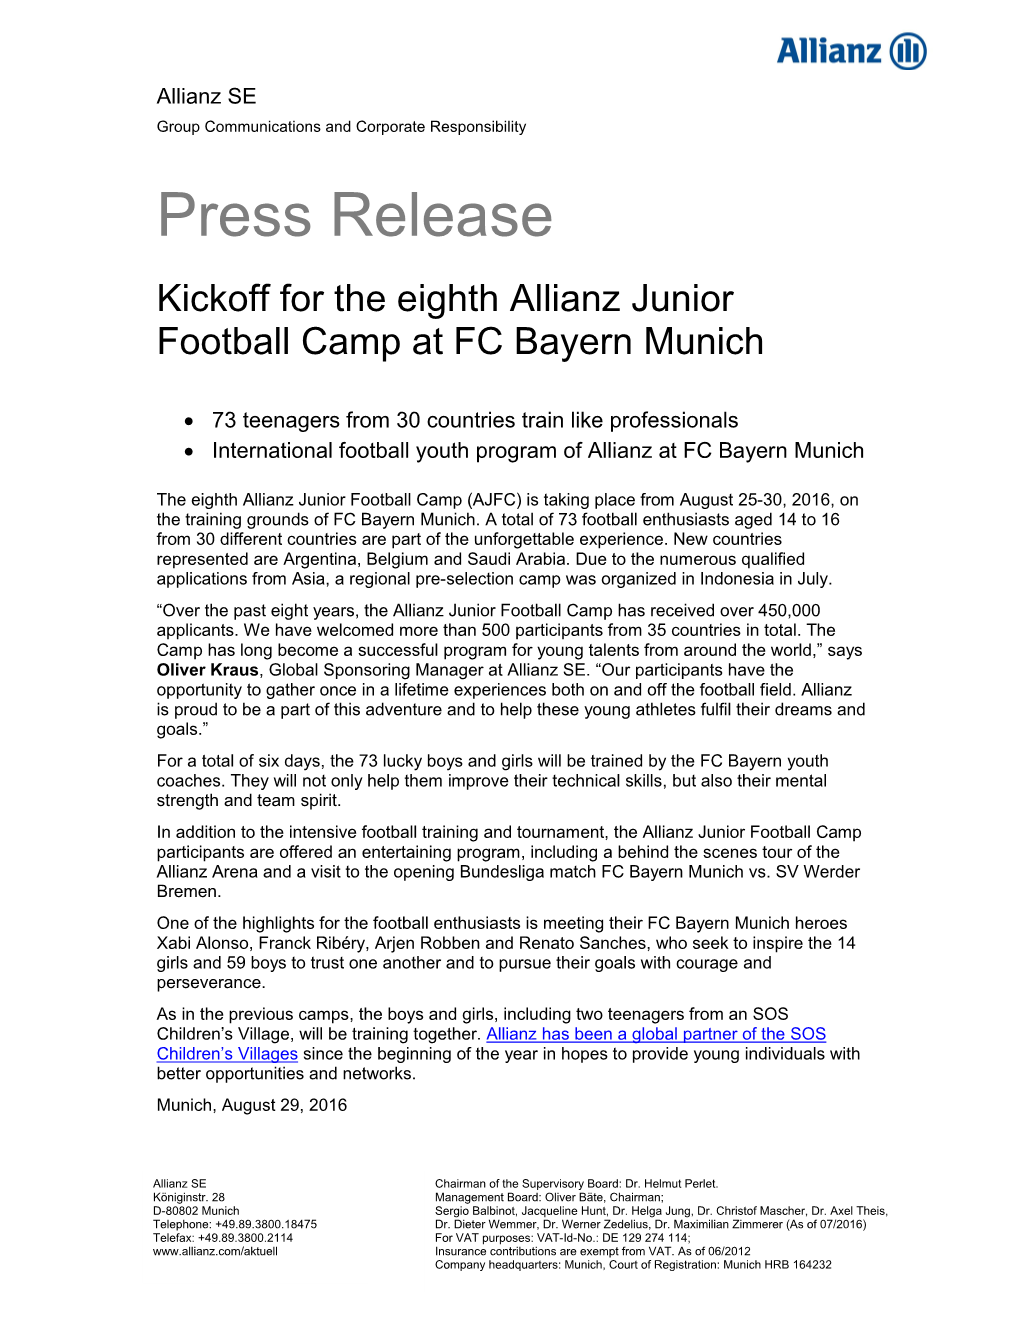 Press Release Kickoff for the Eighth Allianz Junior Football Camp at FC Bayern Munich